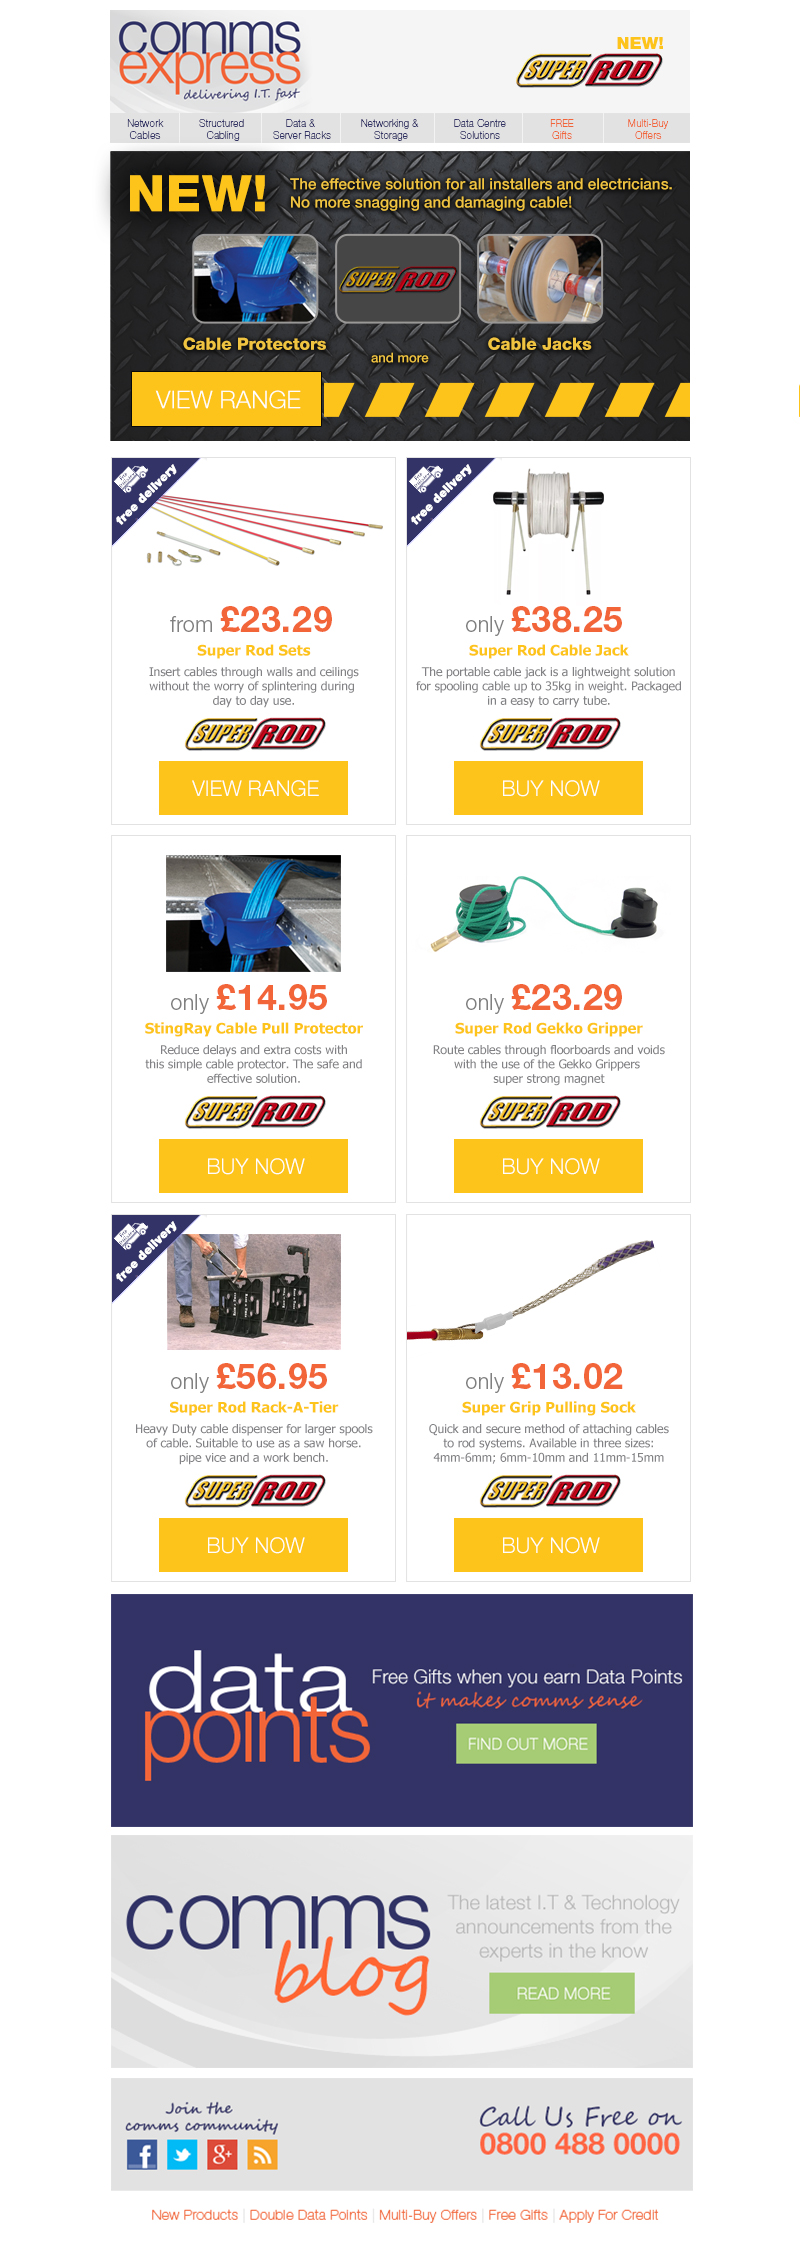 NEW Super Rod Cable Pulling Equipment From Only £13.02